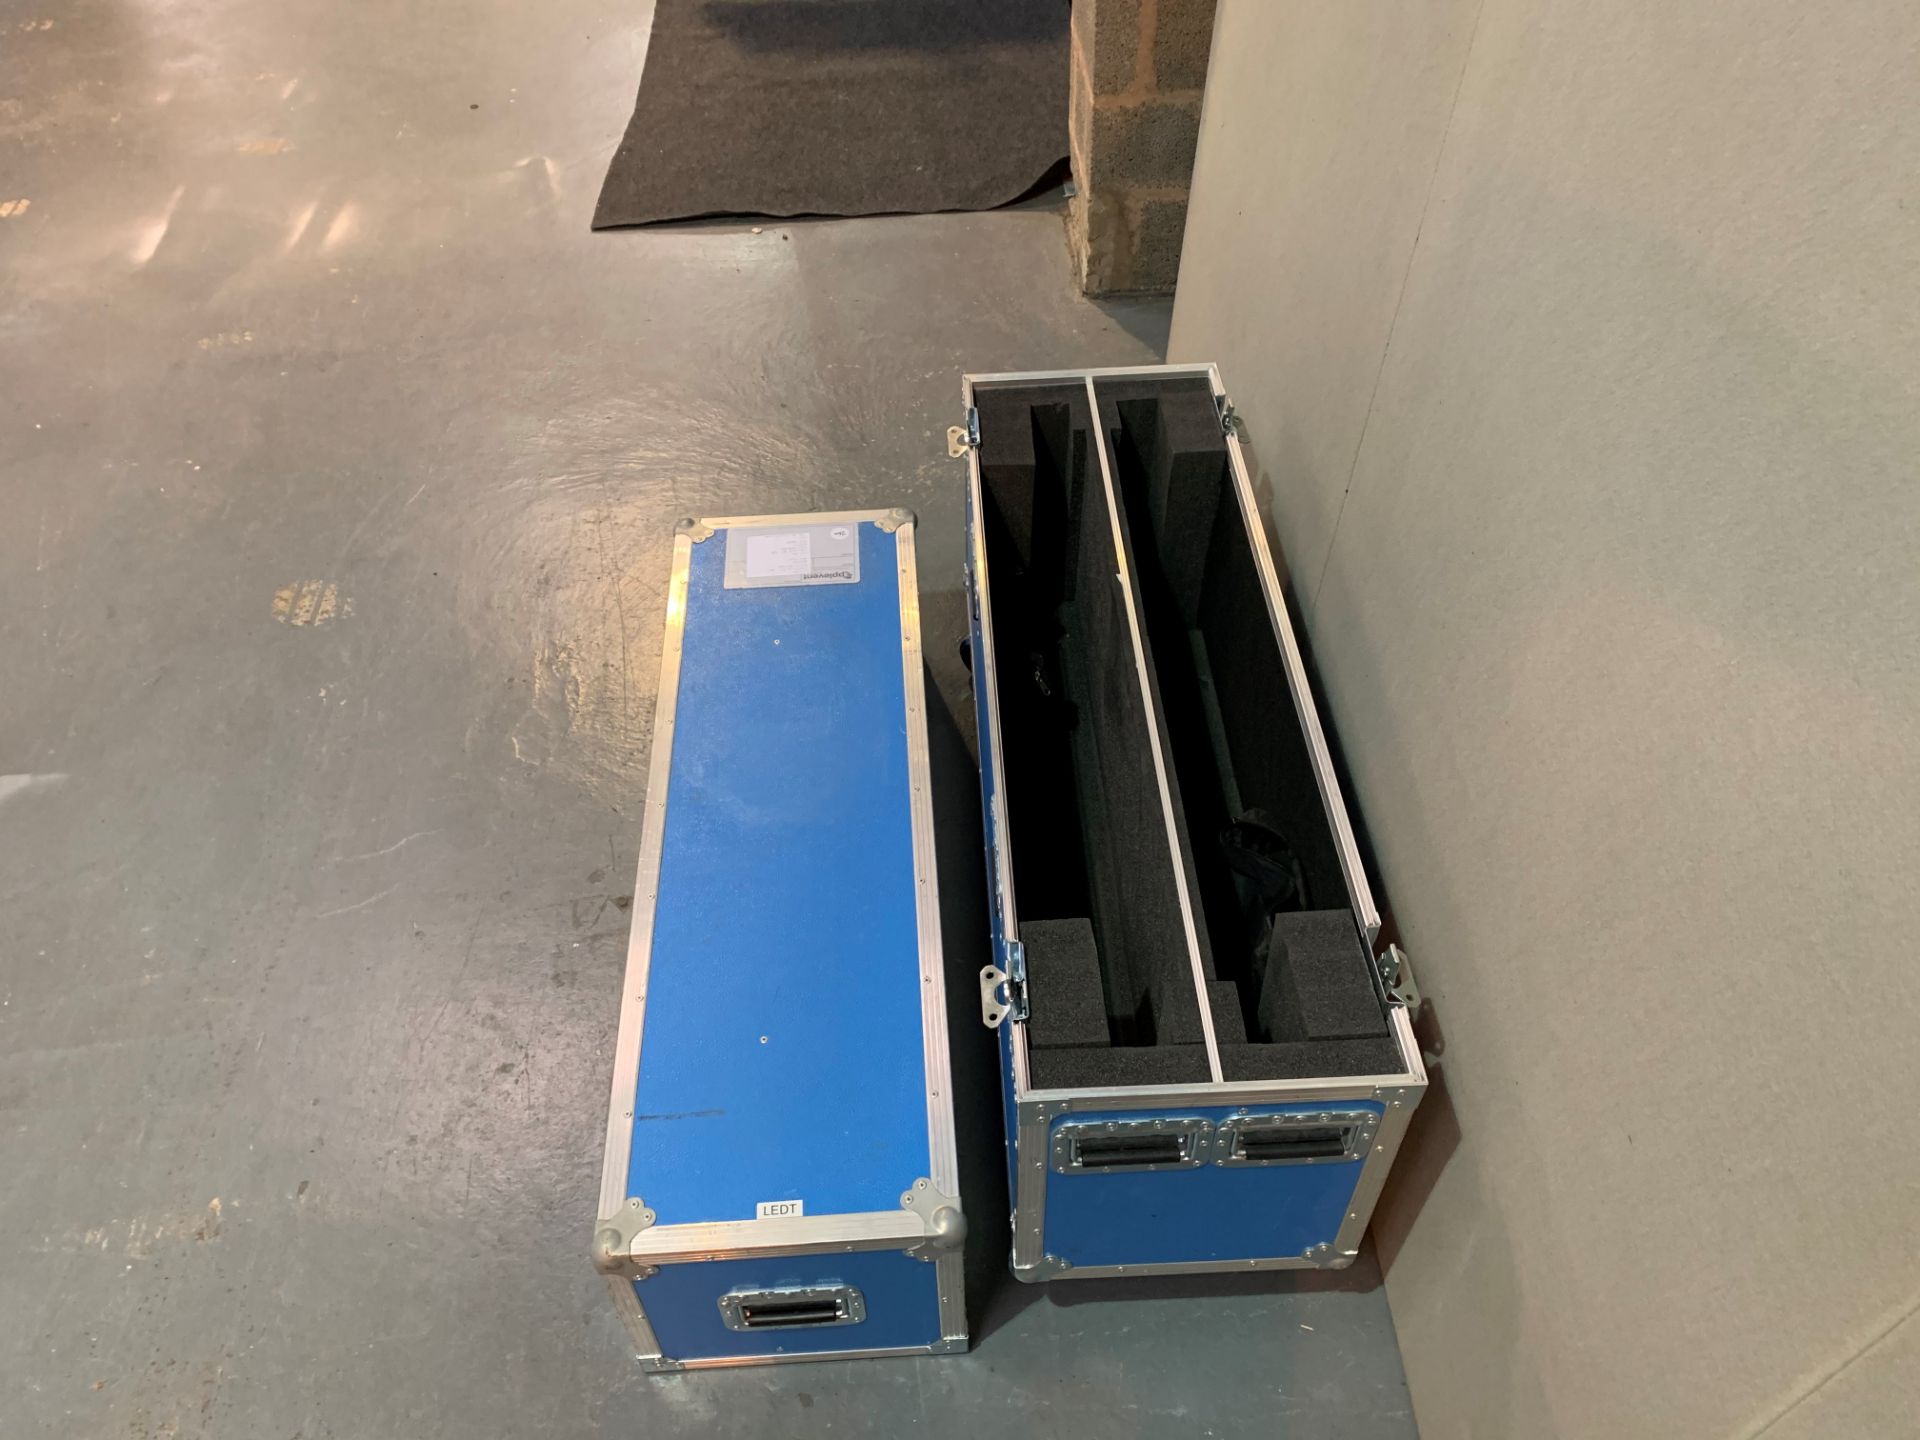 Double Flight case for Lots 25 & 26 - 1228 x 880 x 385mm - Image 2 of 2